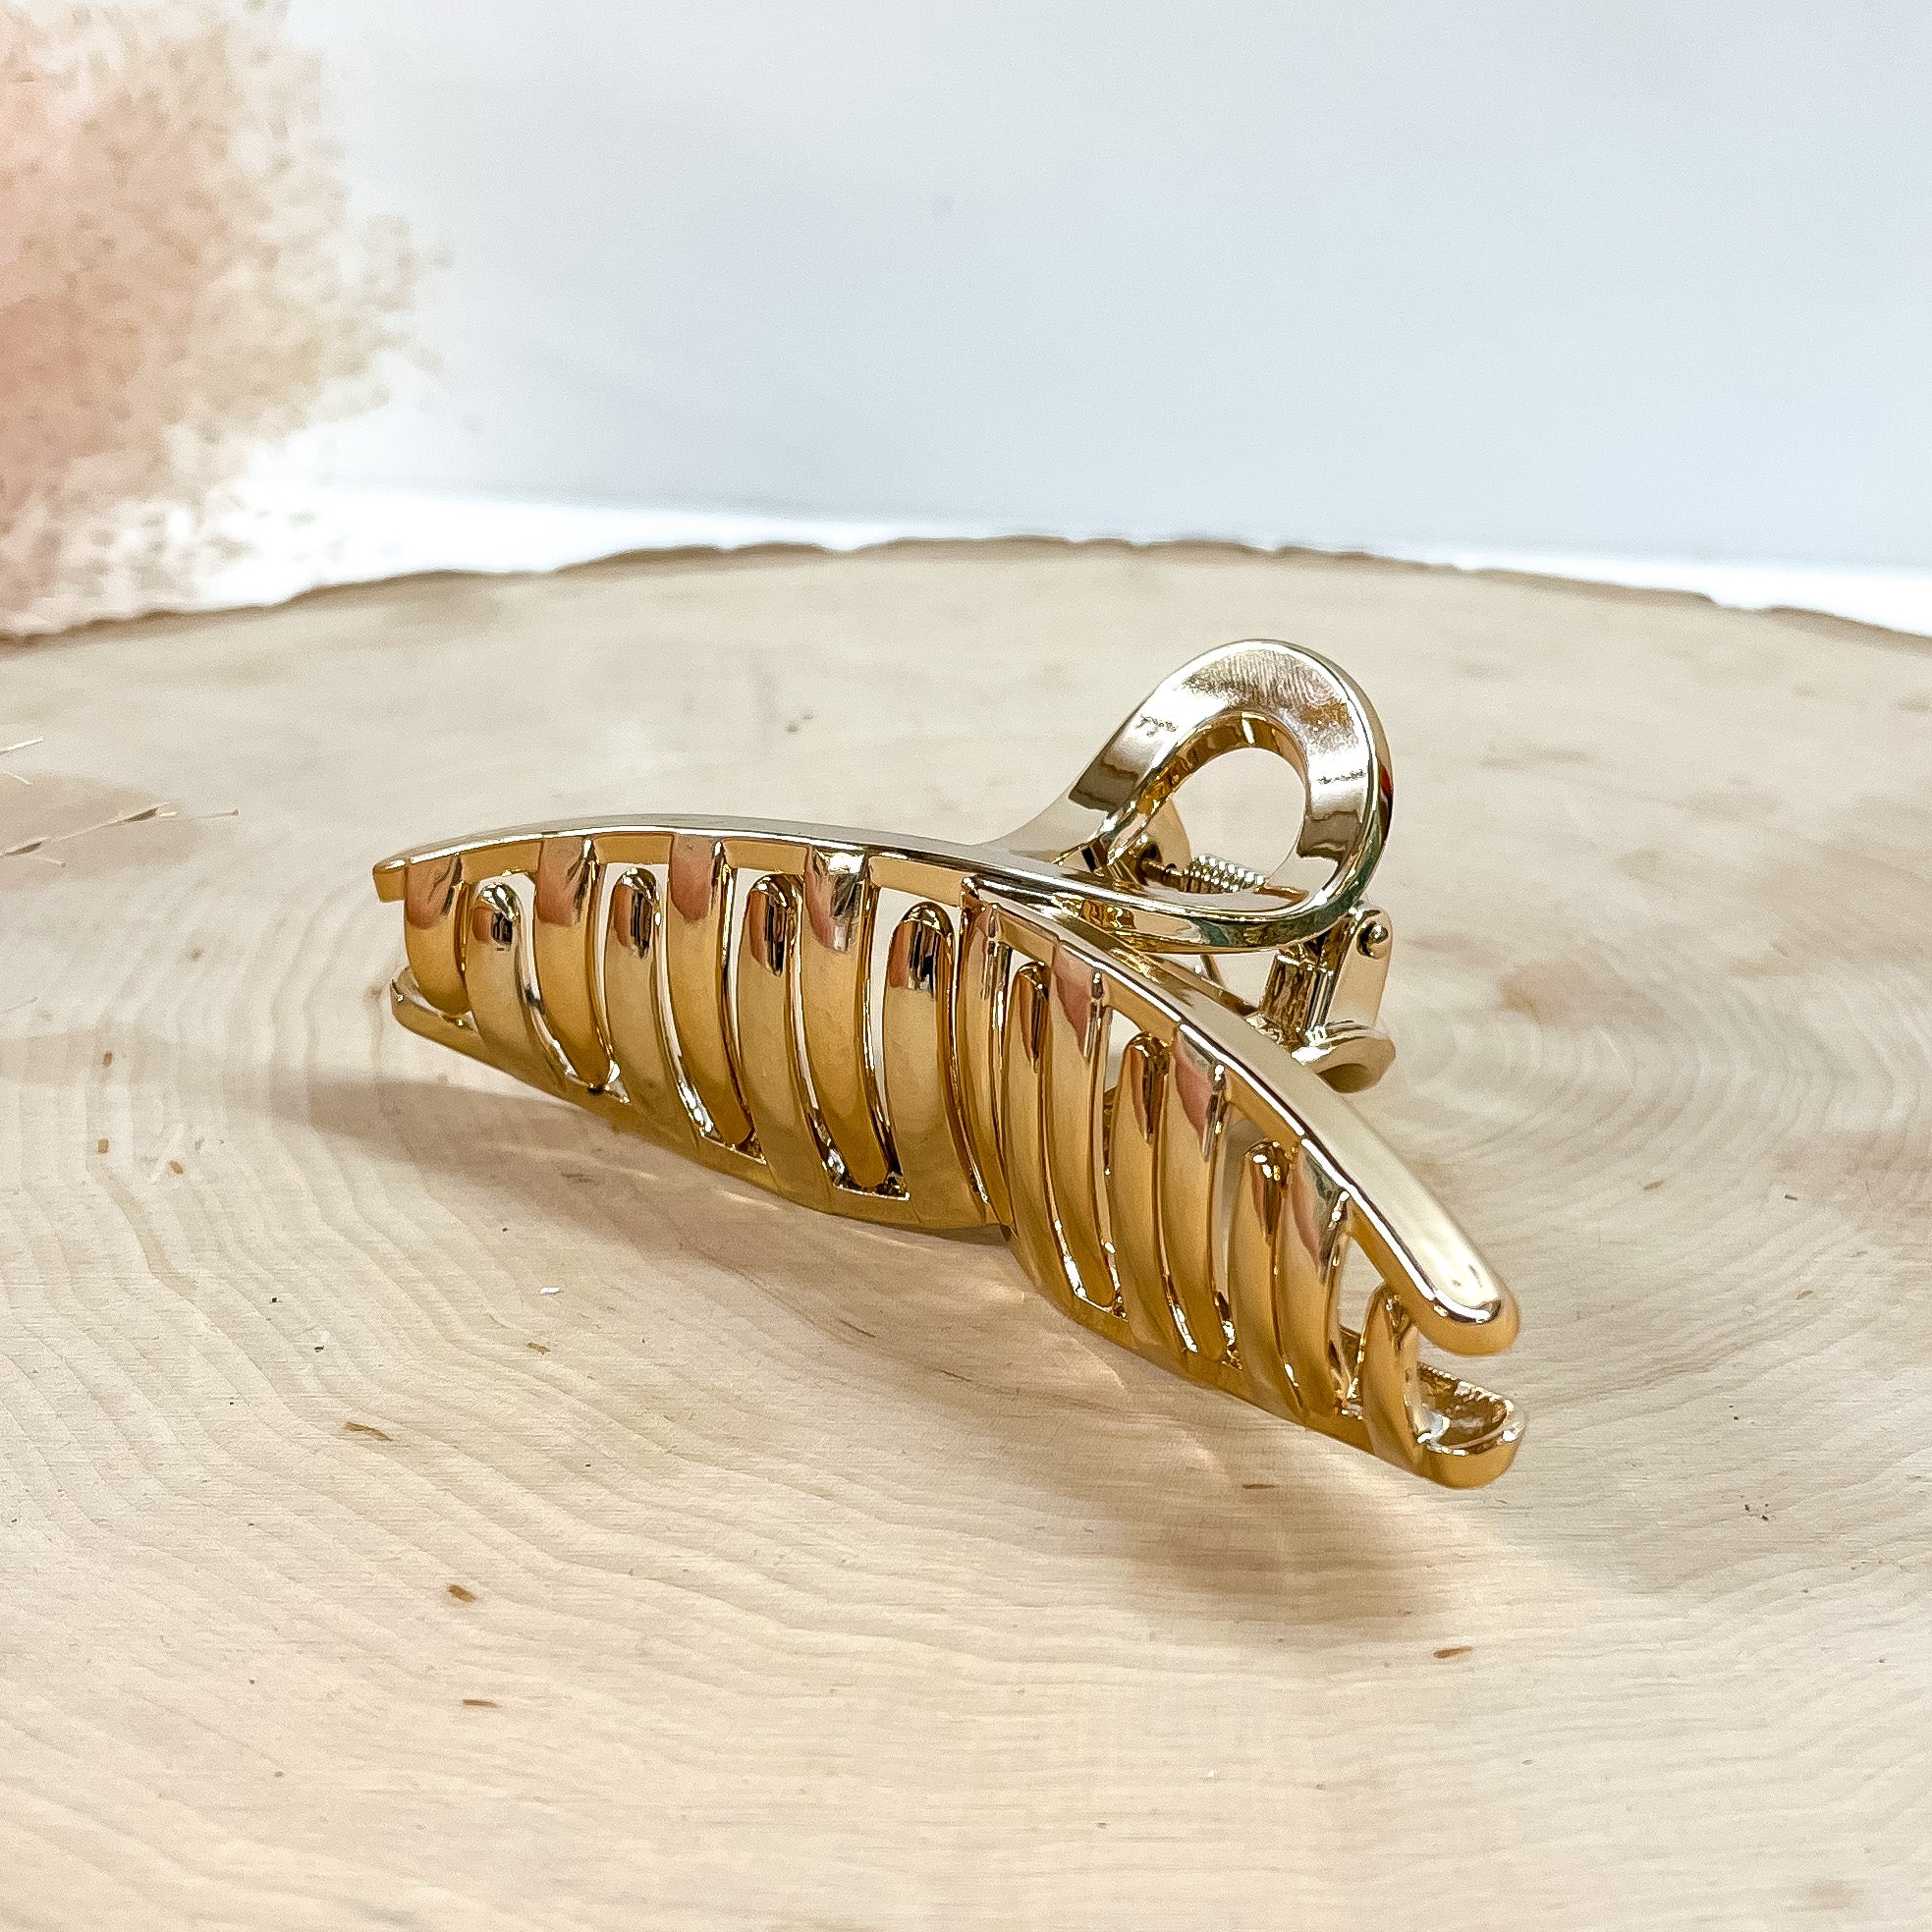 This is a long loop metallic hair clip in cooper/rose gold,  this clip is taken on a  slab of wood and in white background with a plant in the side as decor.